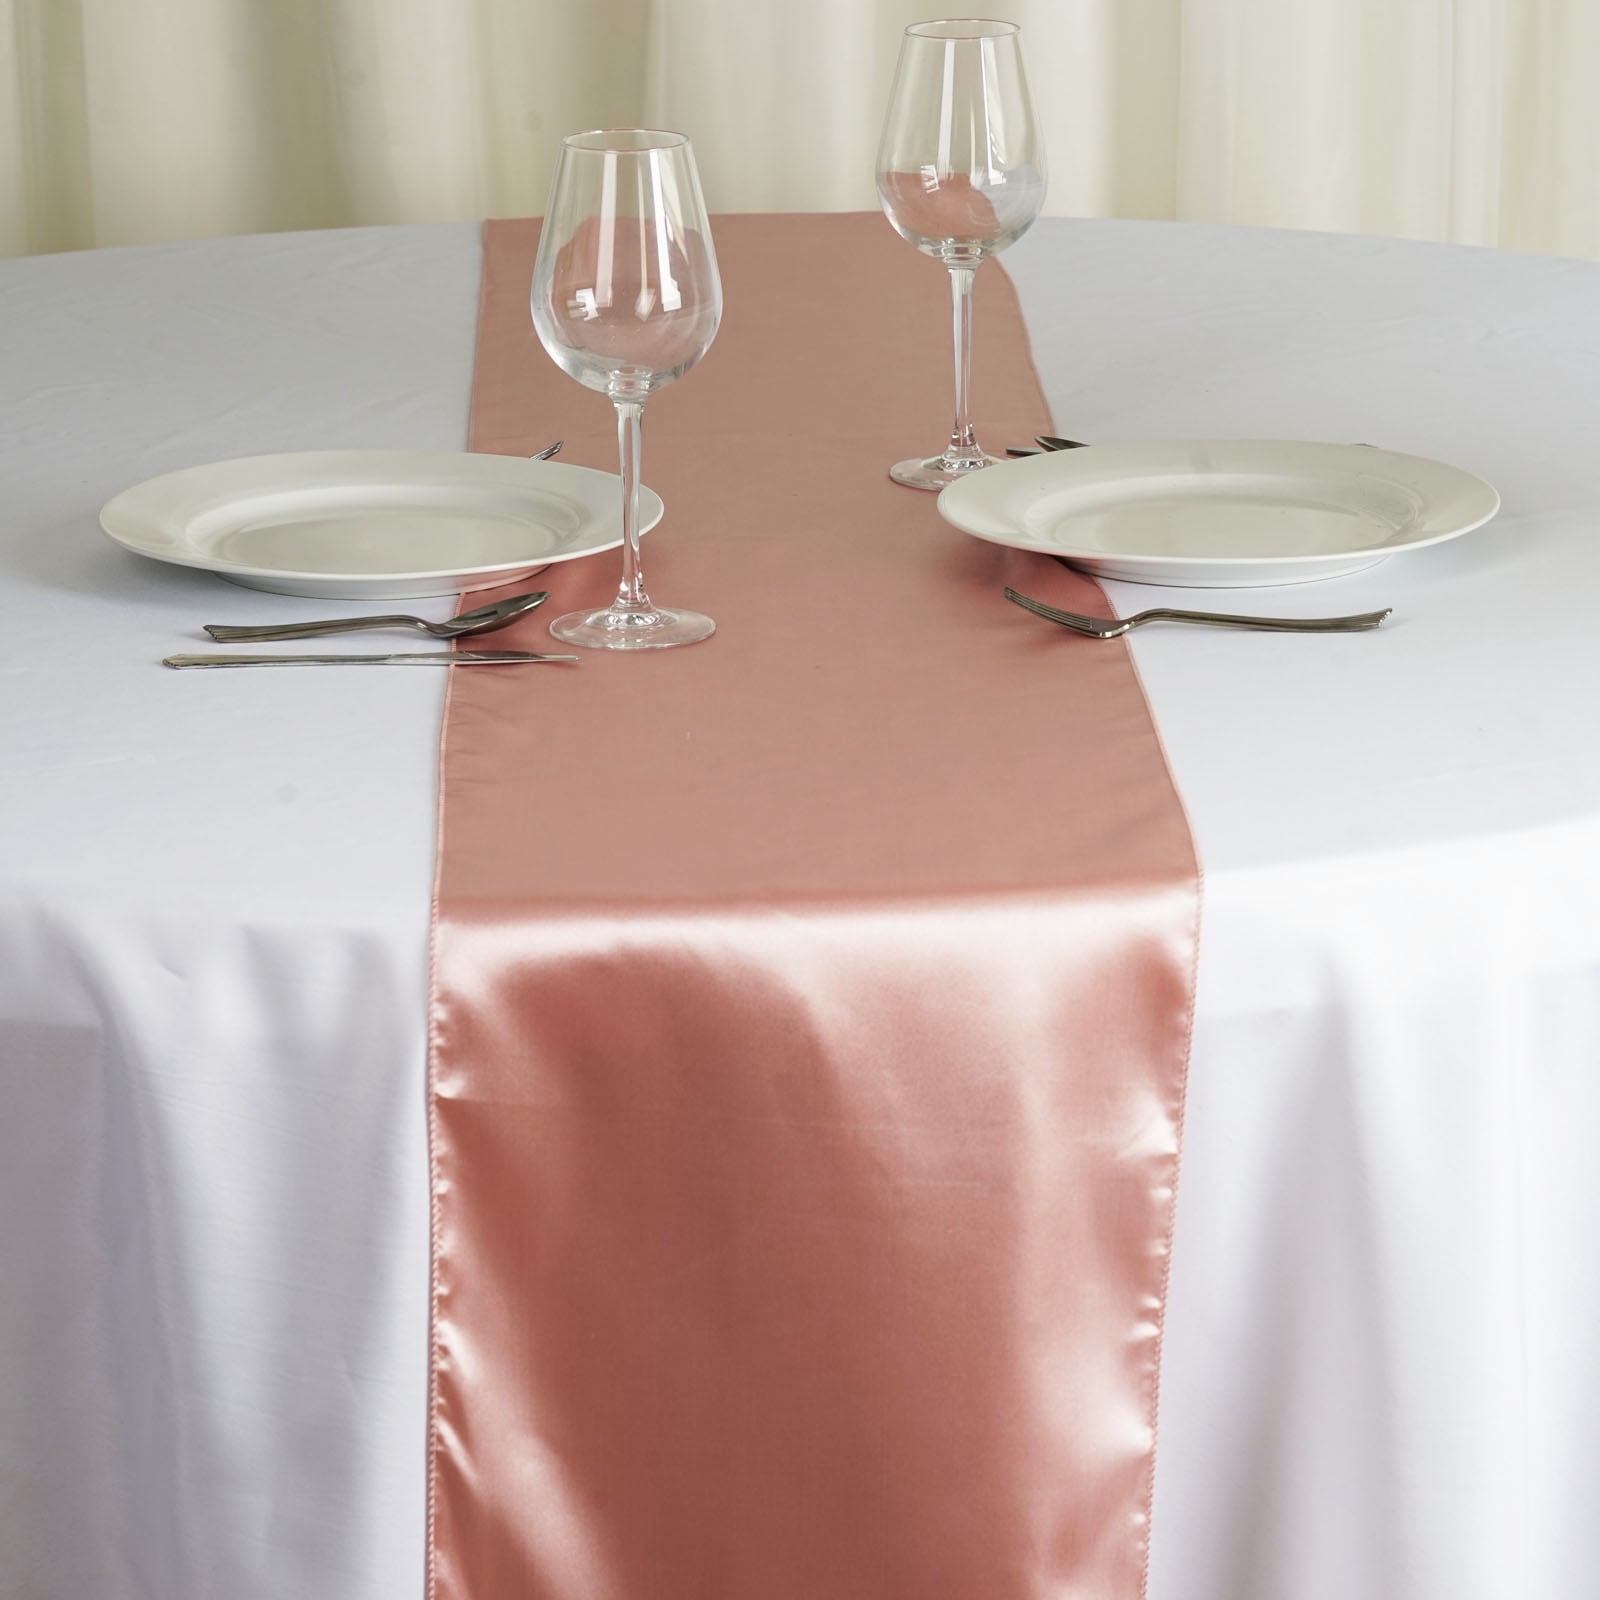 Details about   Satin Roses Banquet Table Skirt Dinner Catering Party Wedding Linens Decorations 